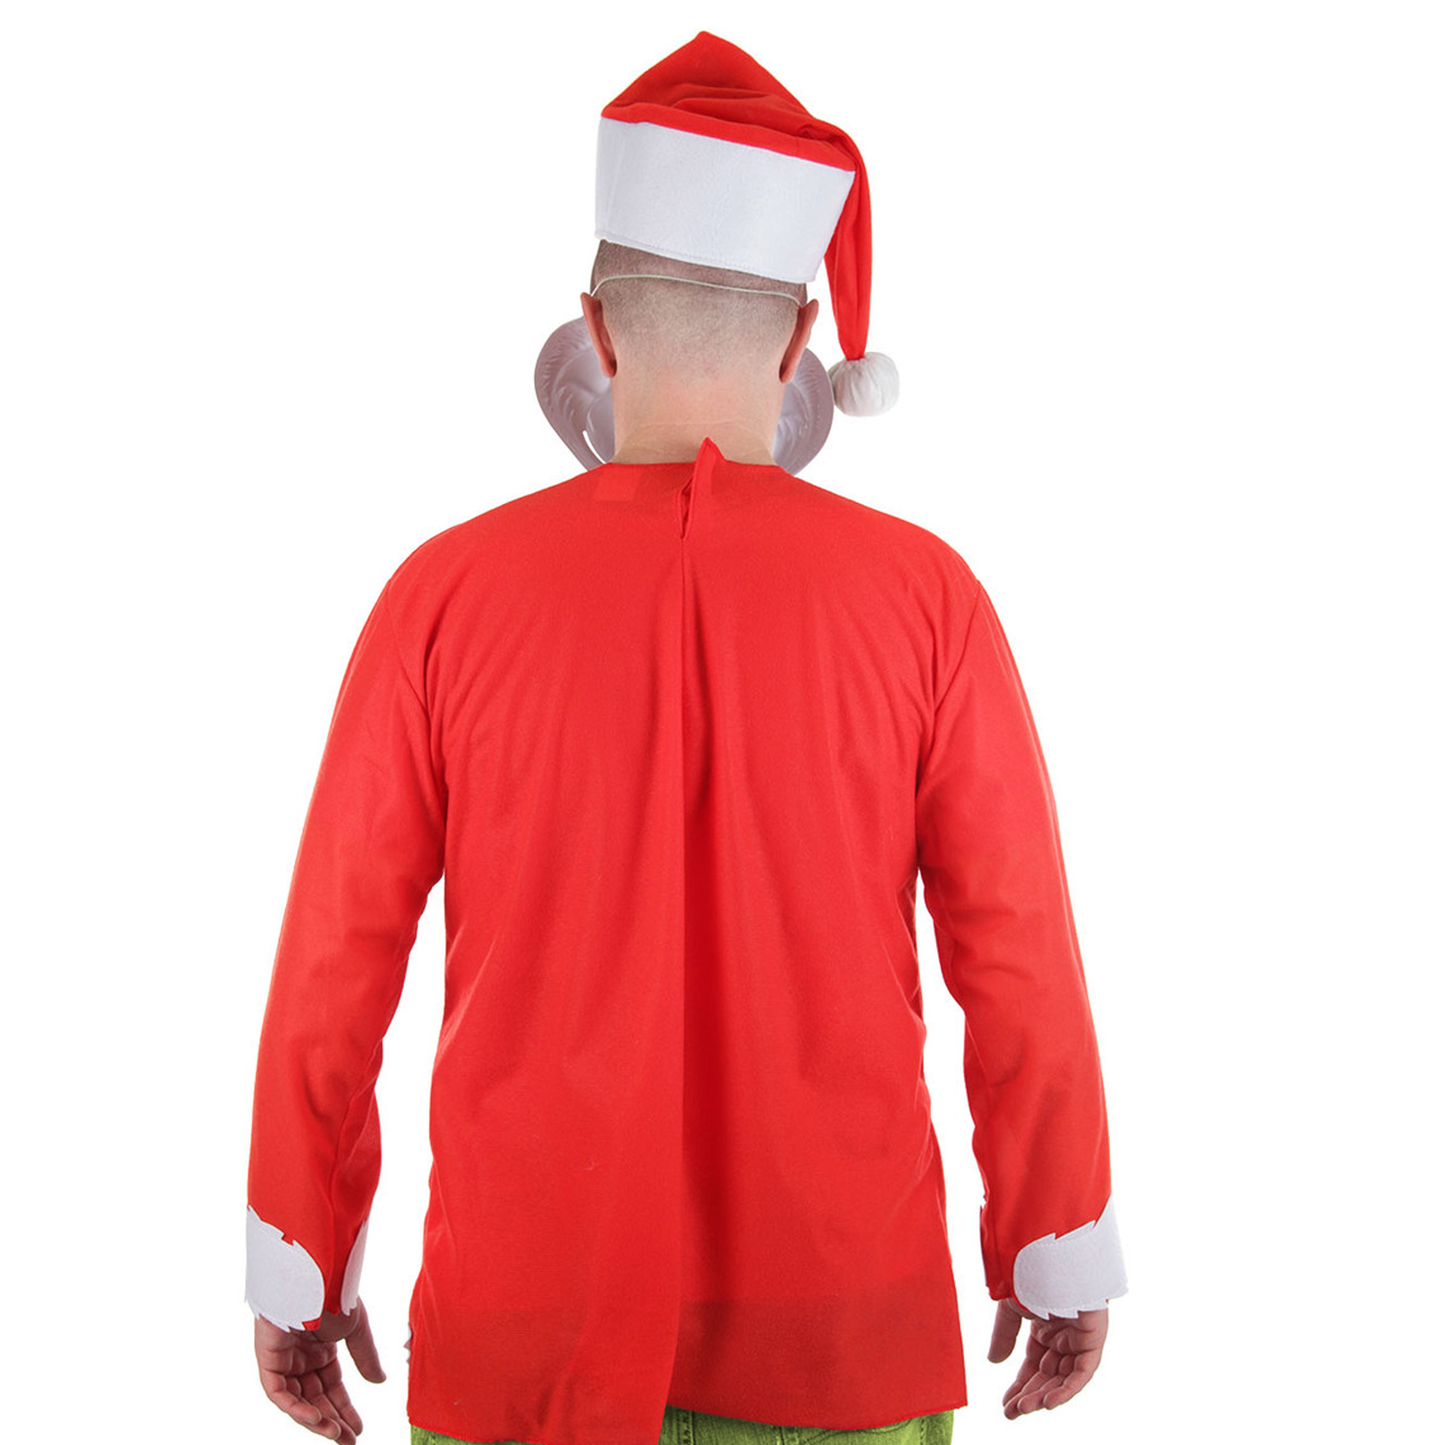 Dr. Seuss The Grinch Santa Costume with Half Mask